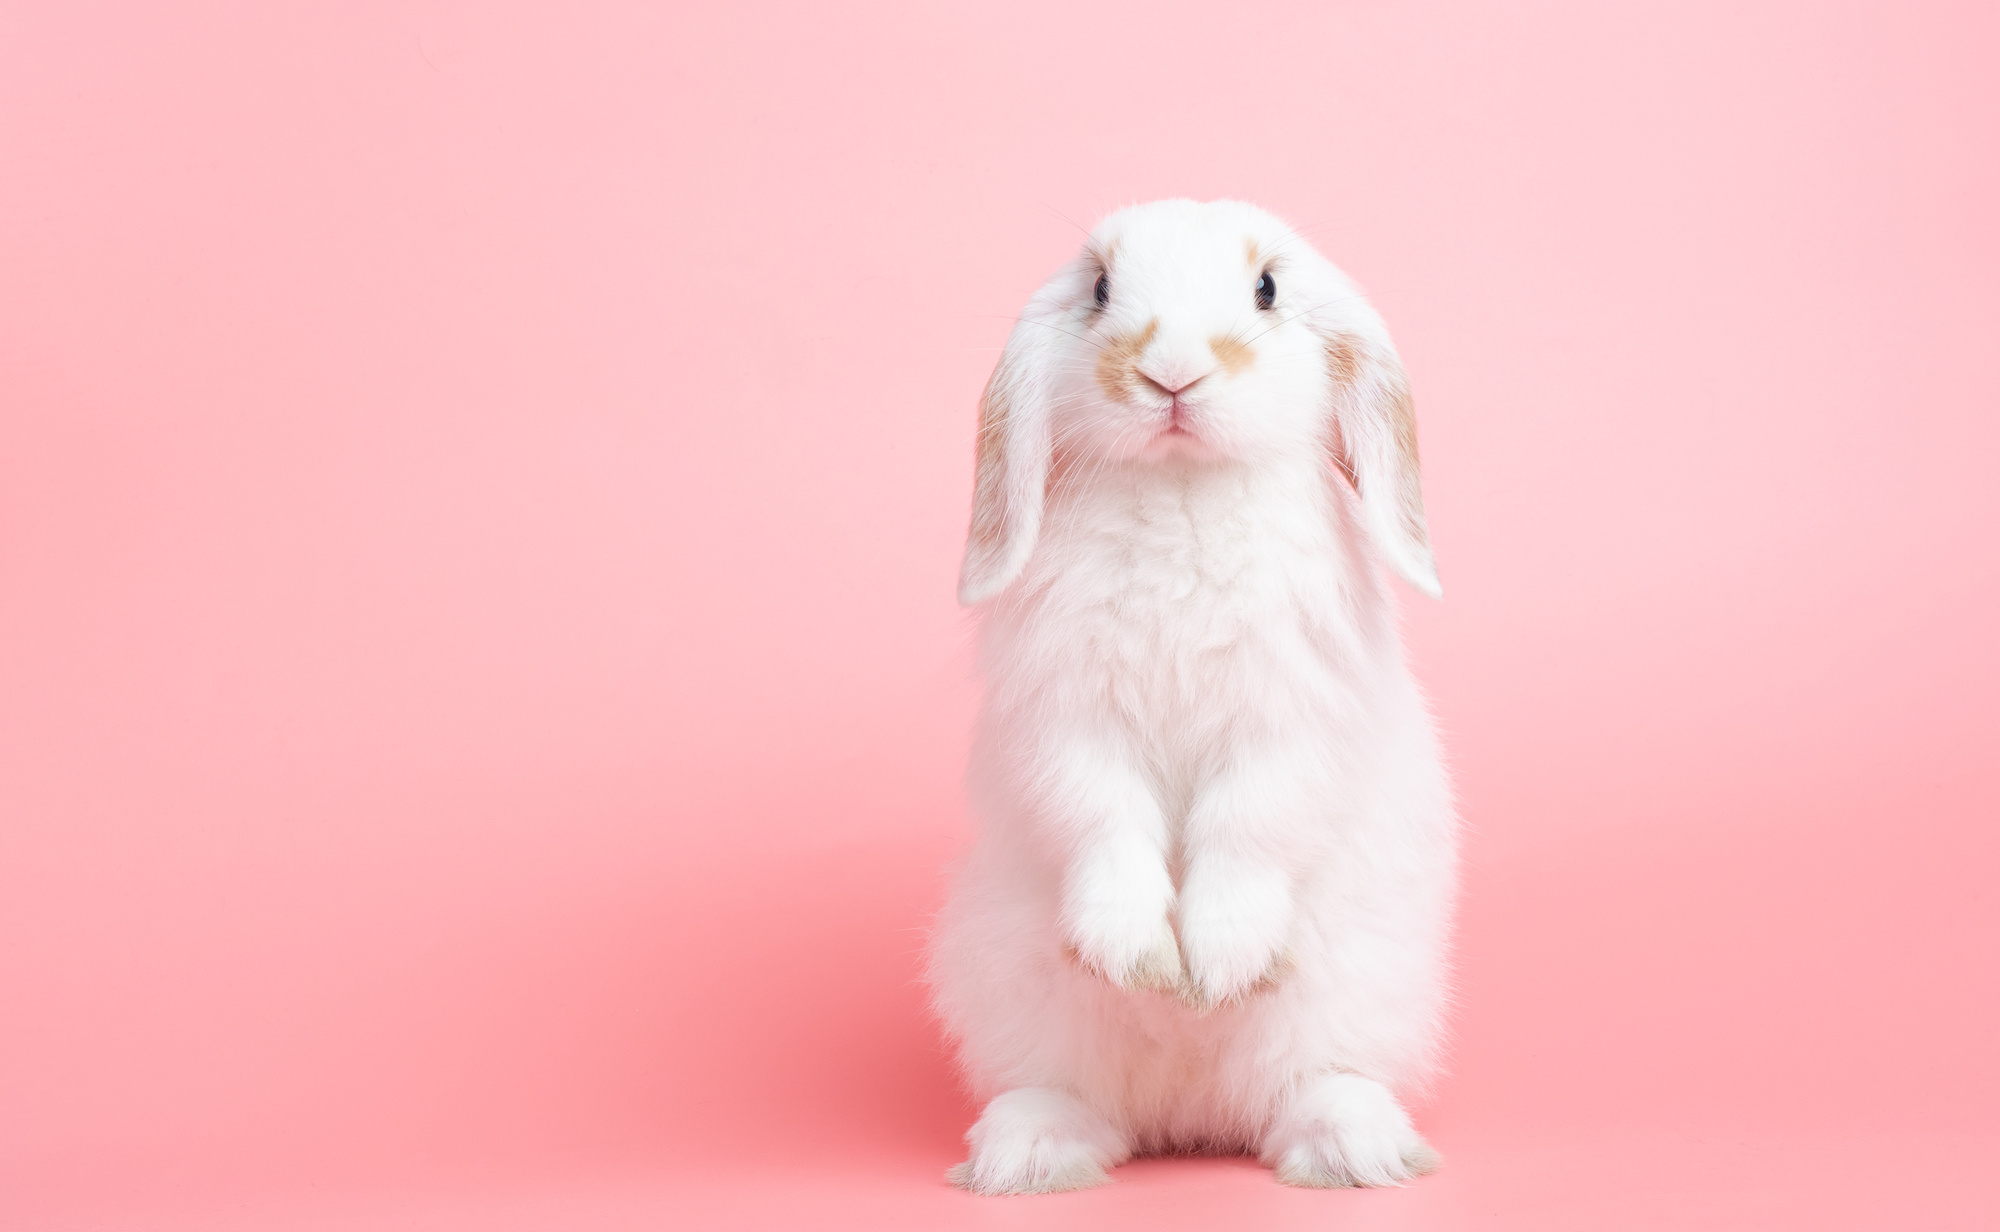 A white bunny is pictured against a pink background.